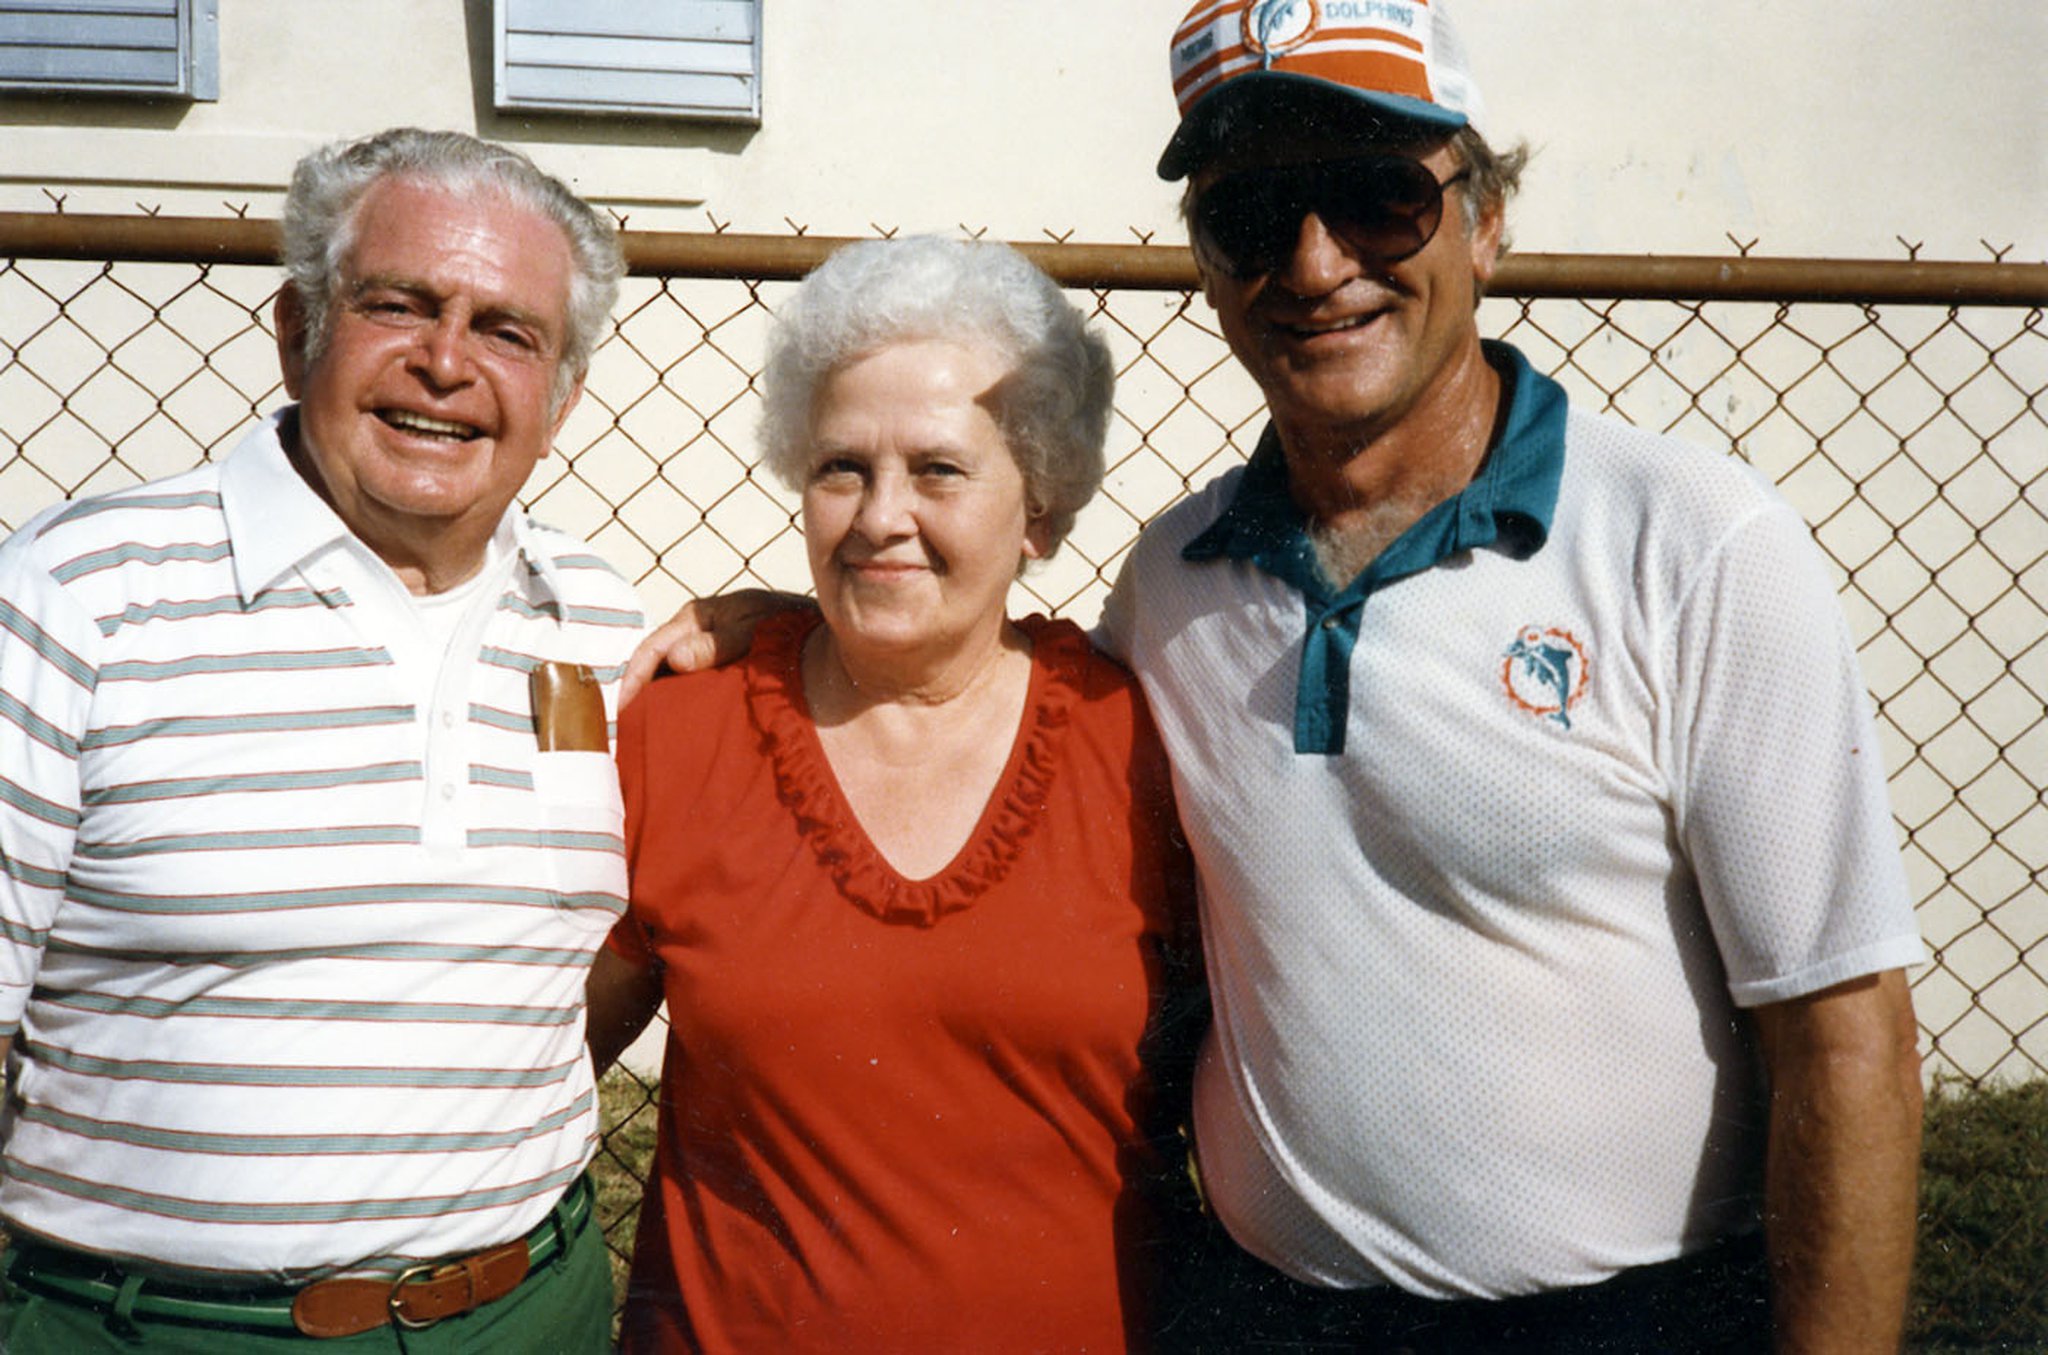 Columnist Tom Archdeacon recalls his time covering late Don Shula